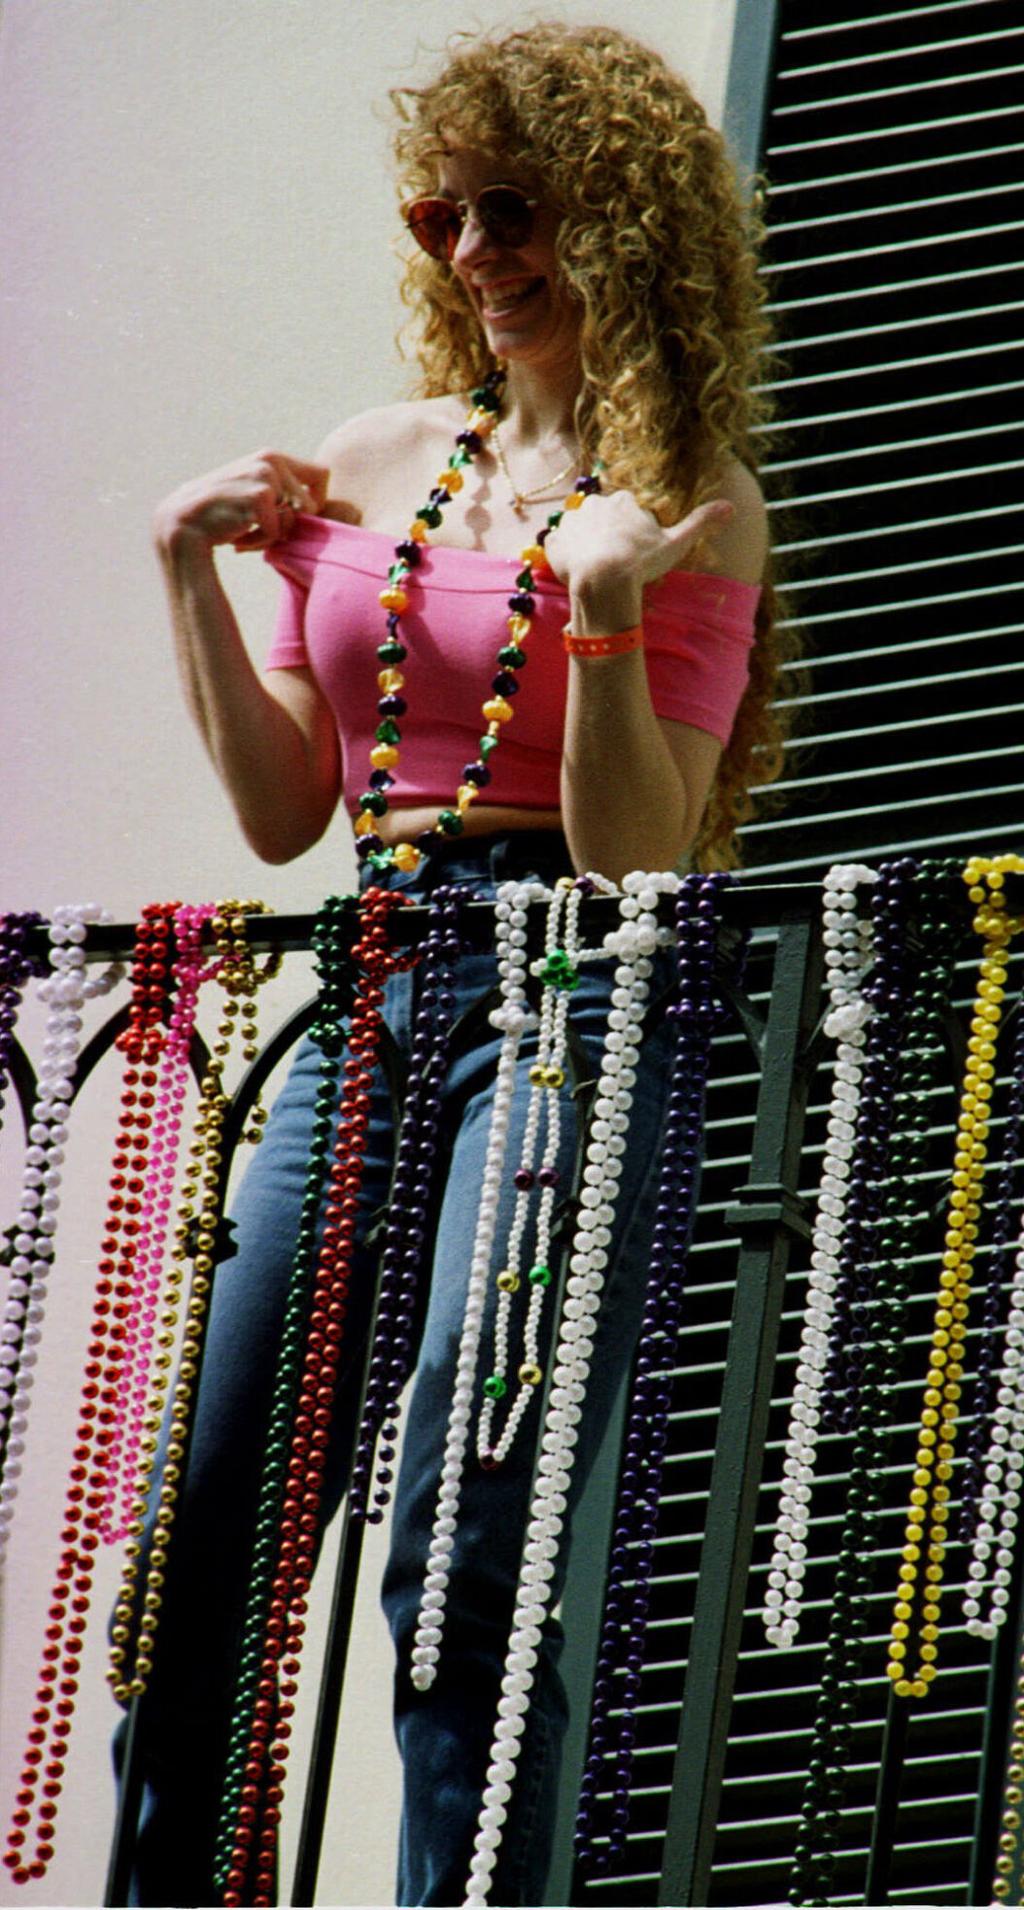 amy louise fry recommends mardi gras flashing photos pic